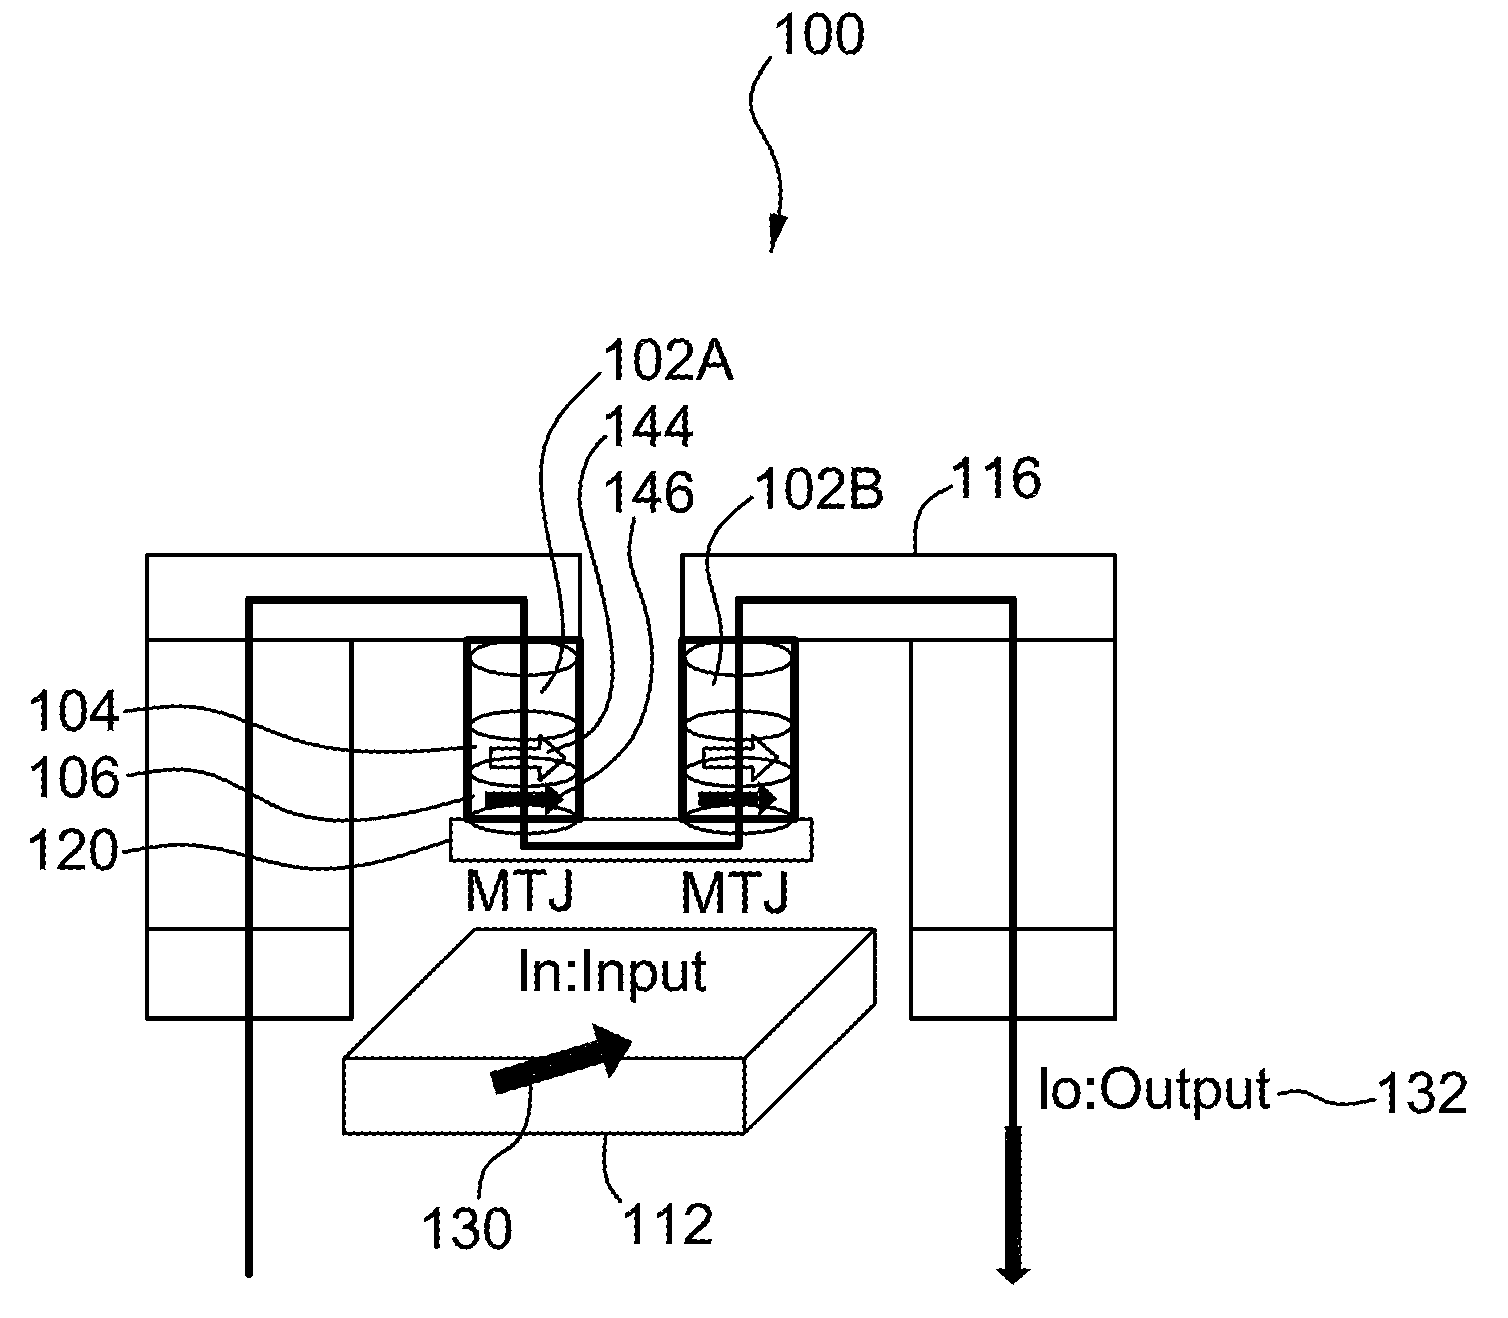 Magnetic Logic Units Configured to Measure Magnetic Field Direction